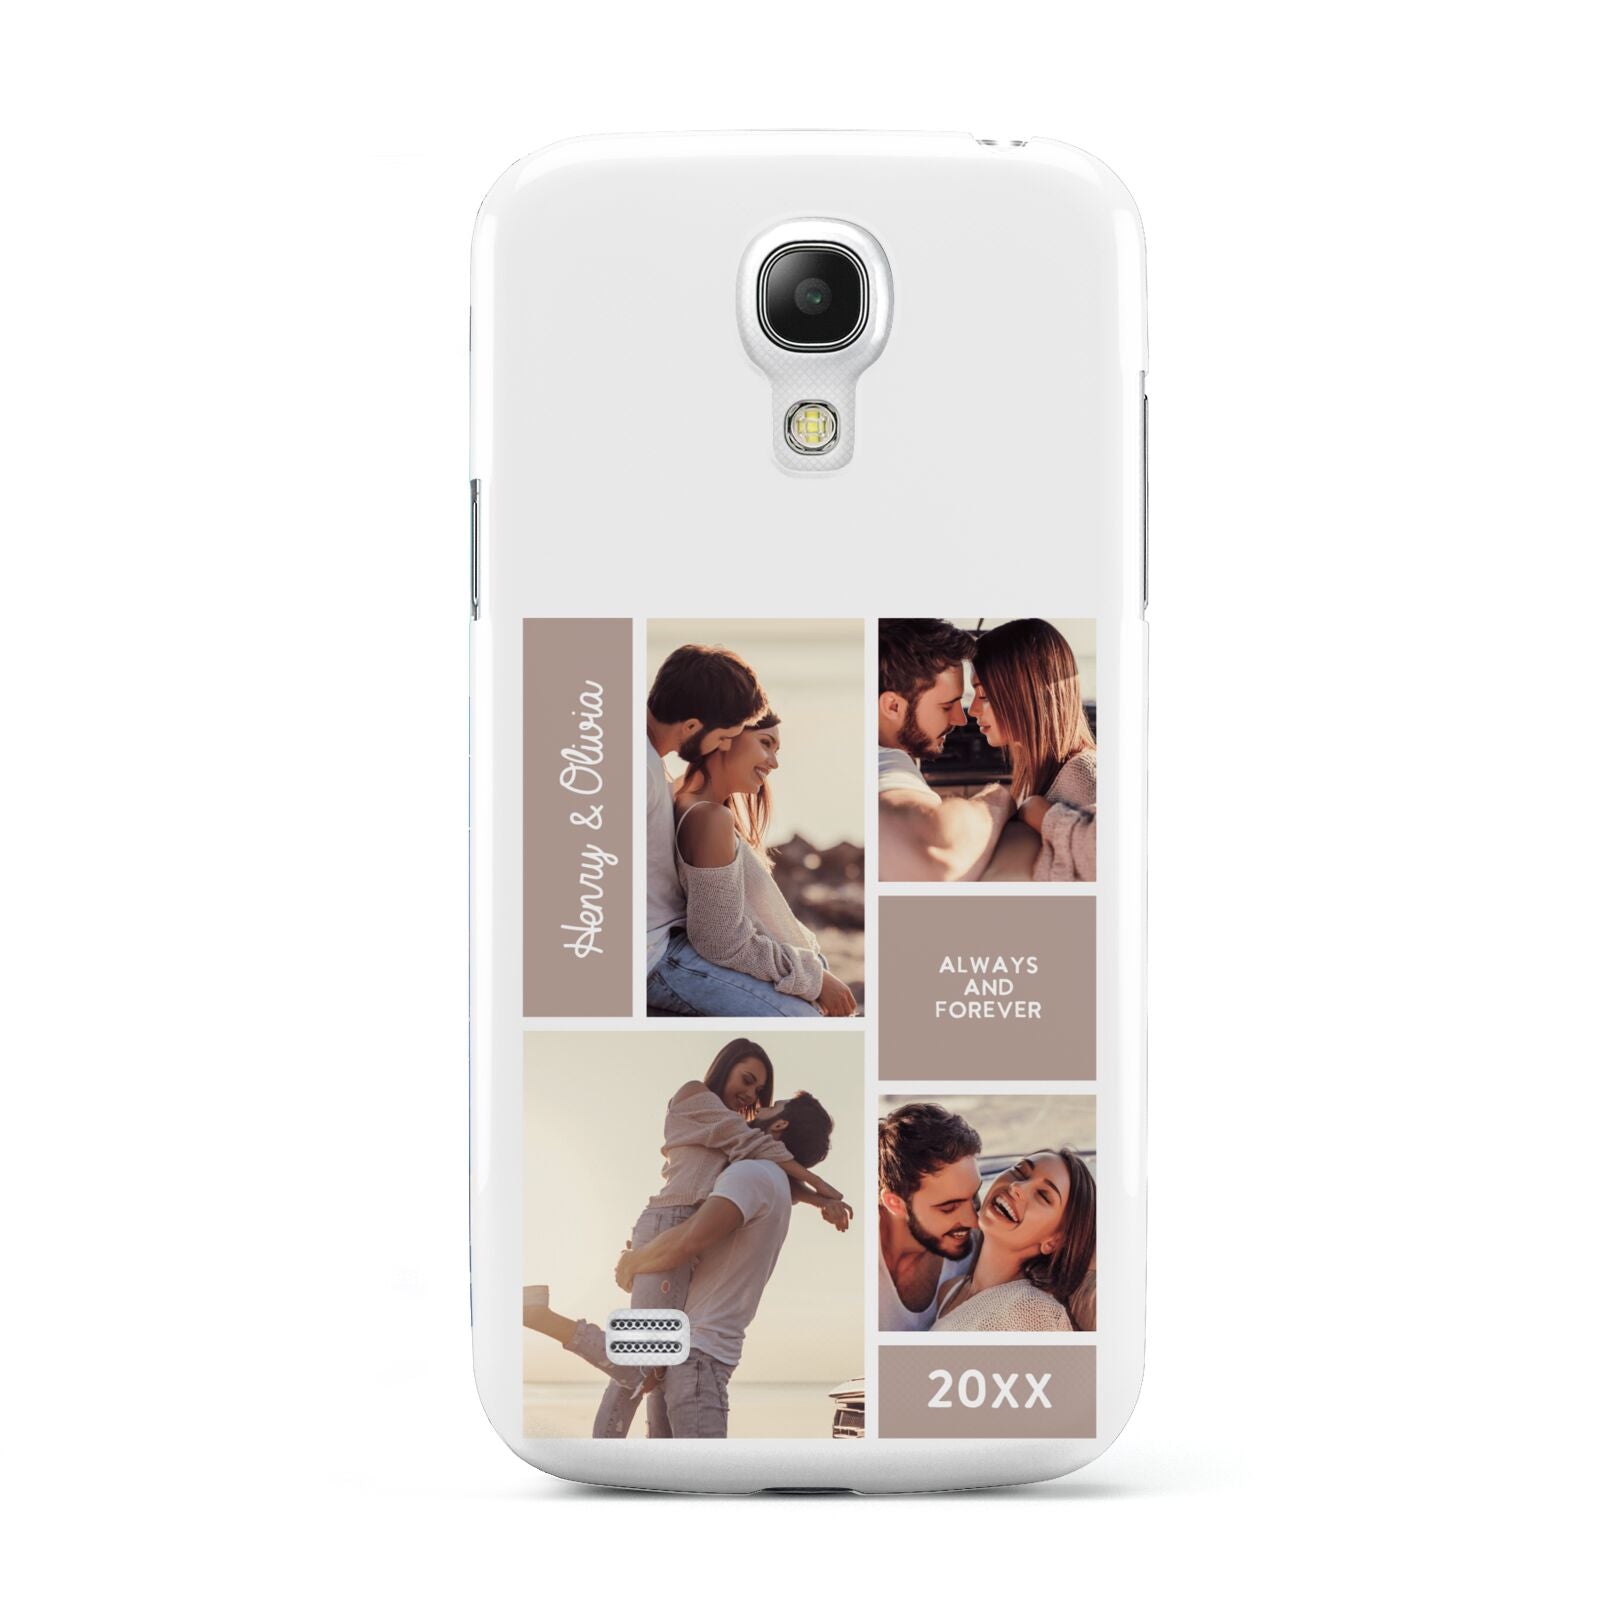 Couples Valentine Photo Collage Personalised Samsung Galaxy S4 Mini Case